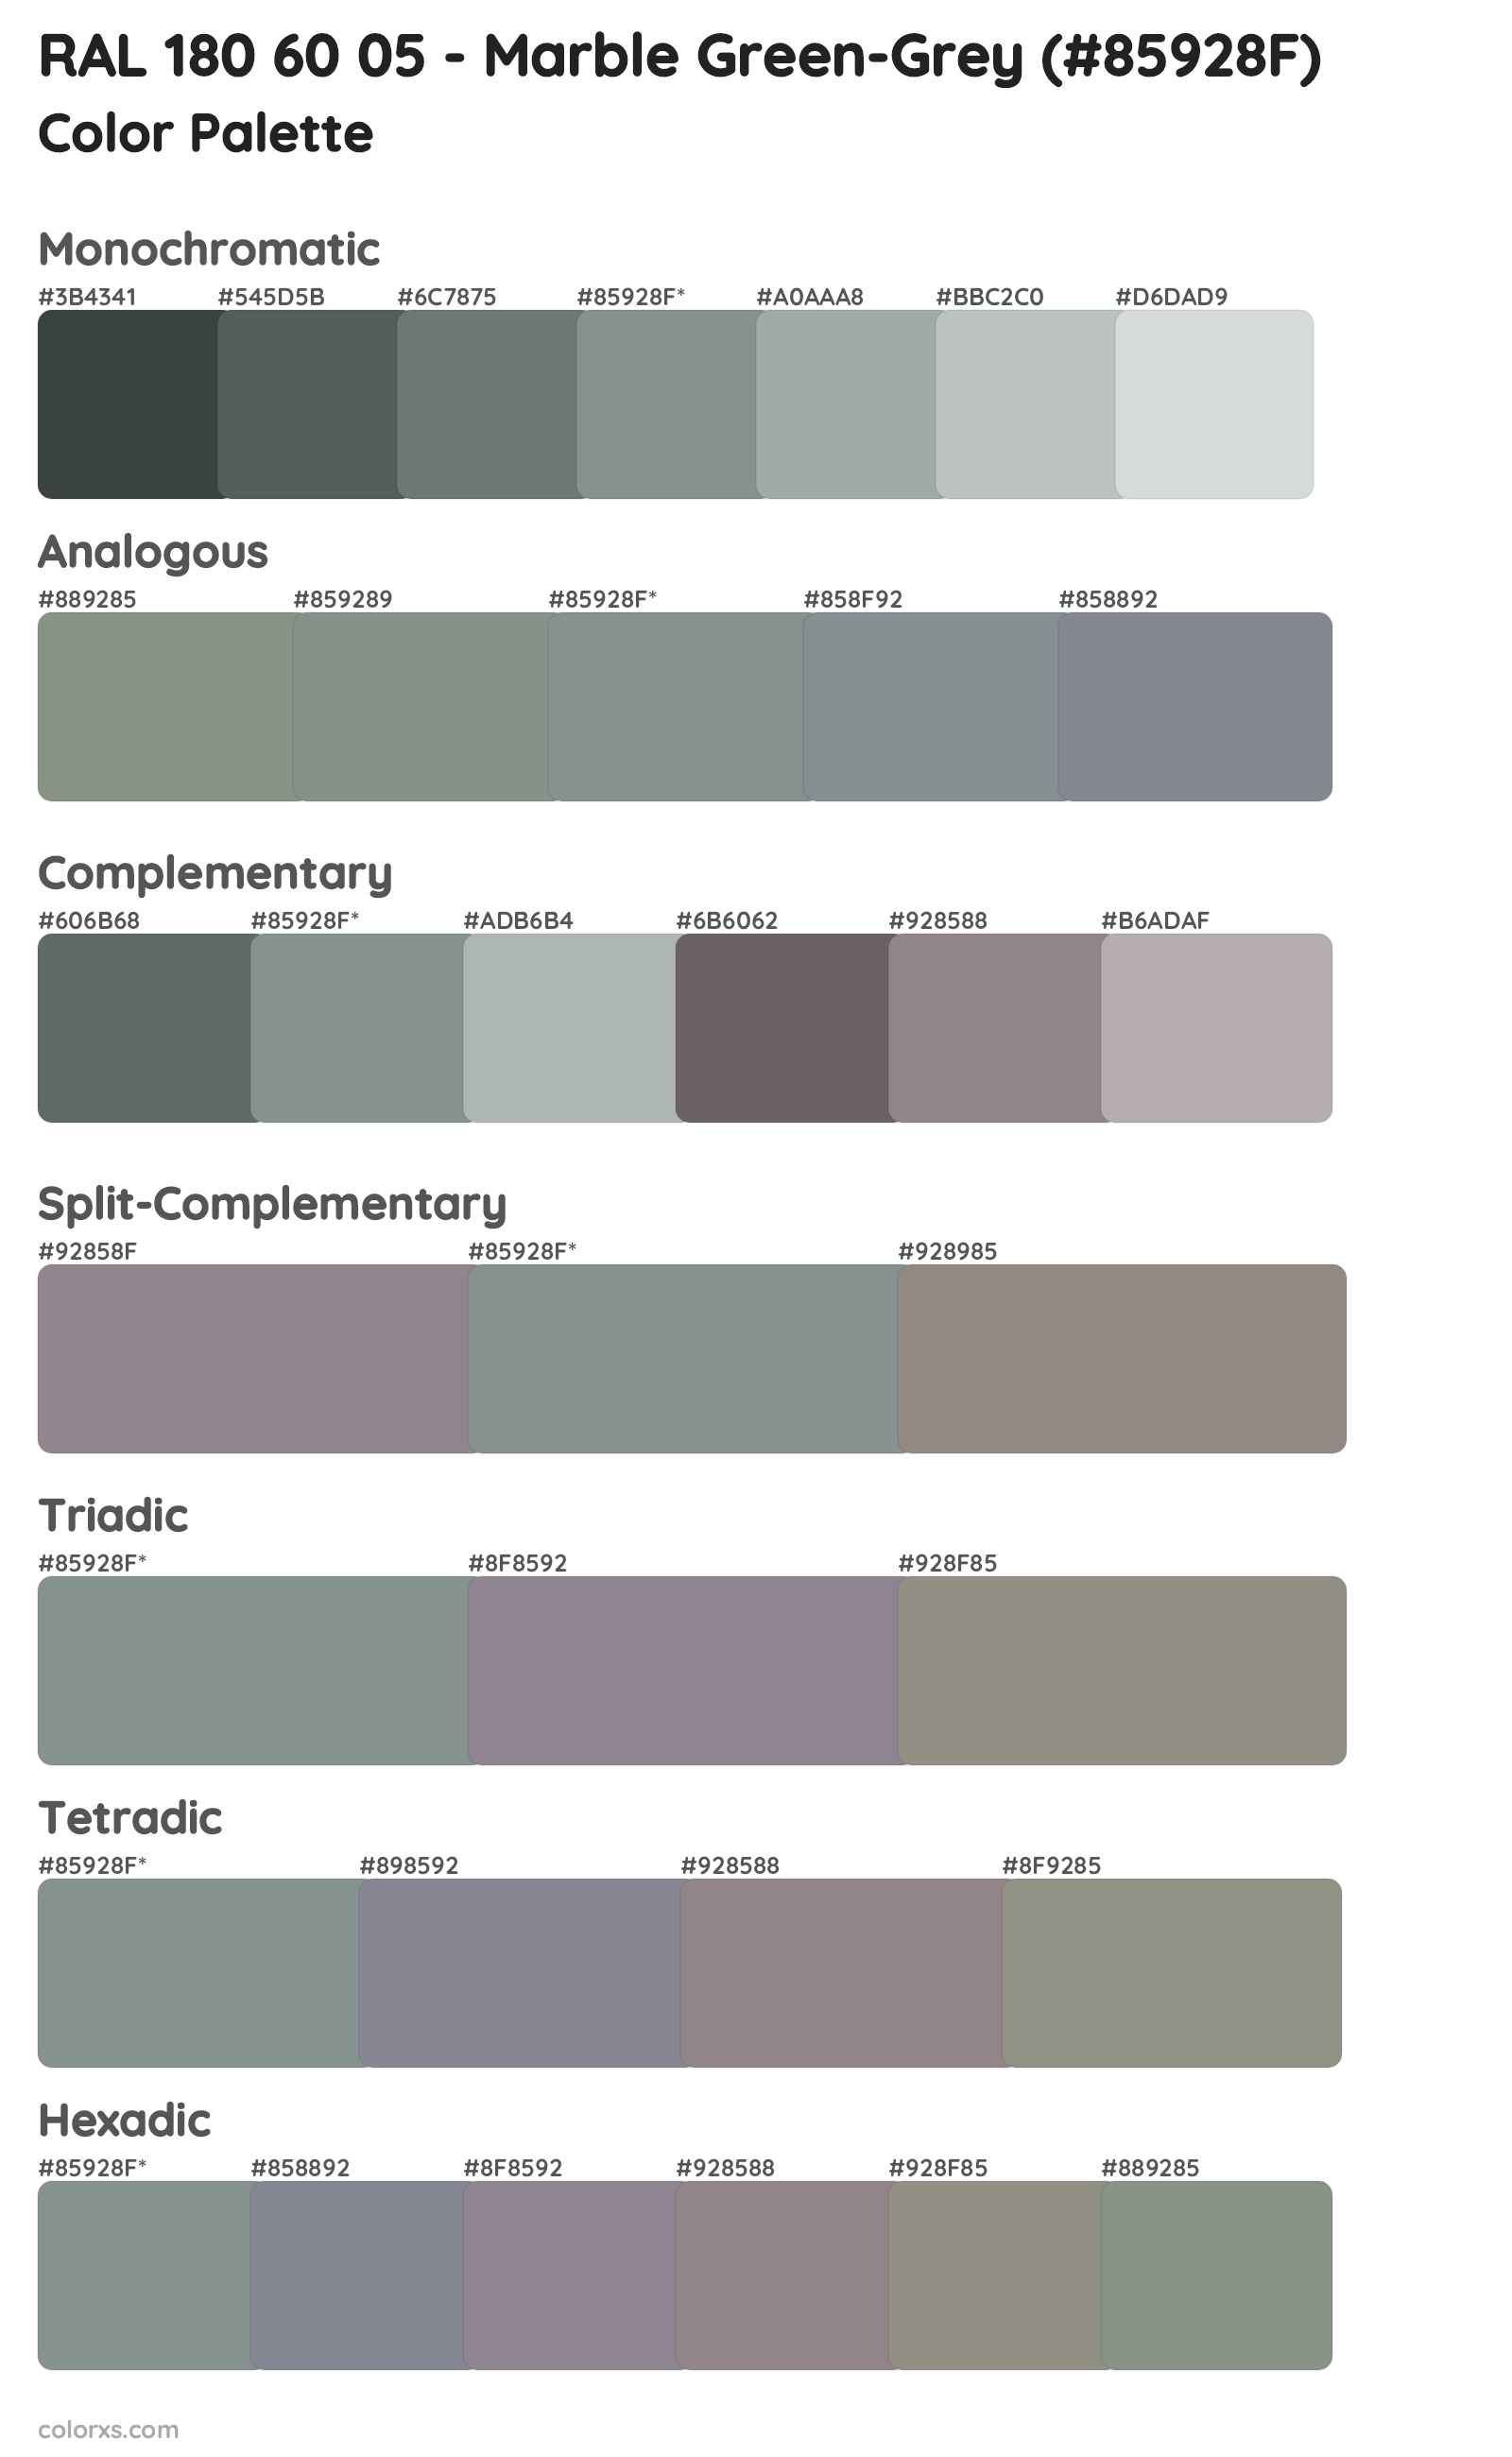 RAL 180 60 05 - Marble Green-Grey Color Scheme Palettes